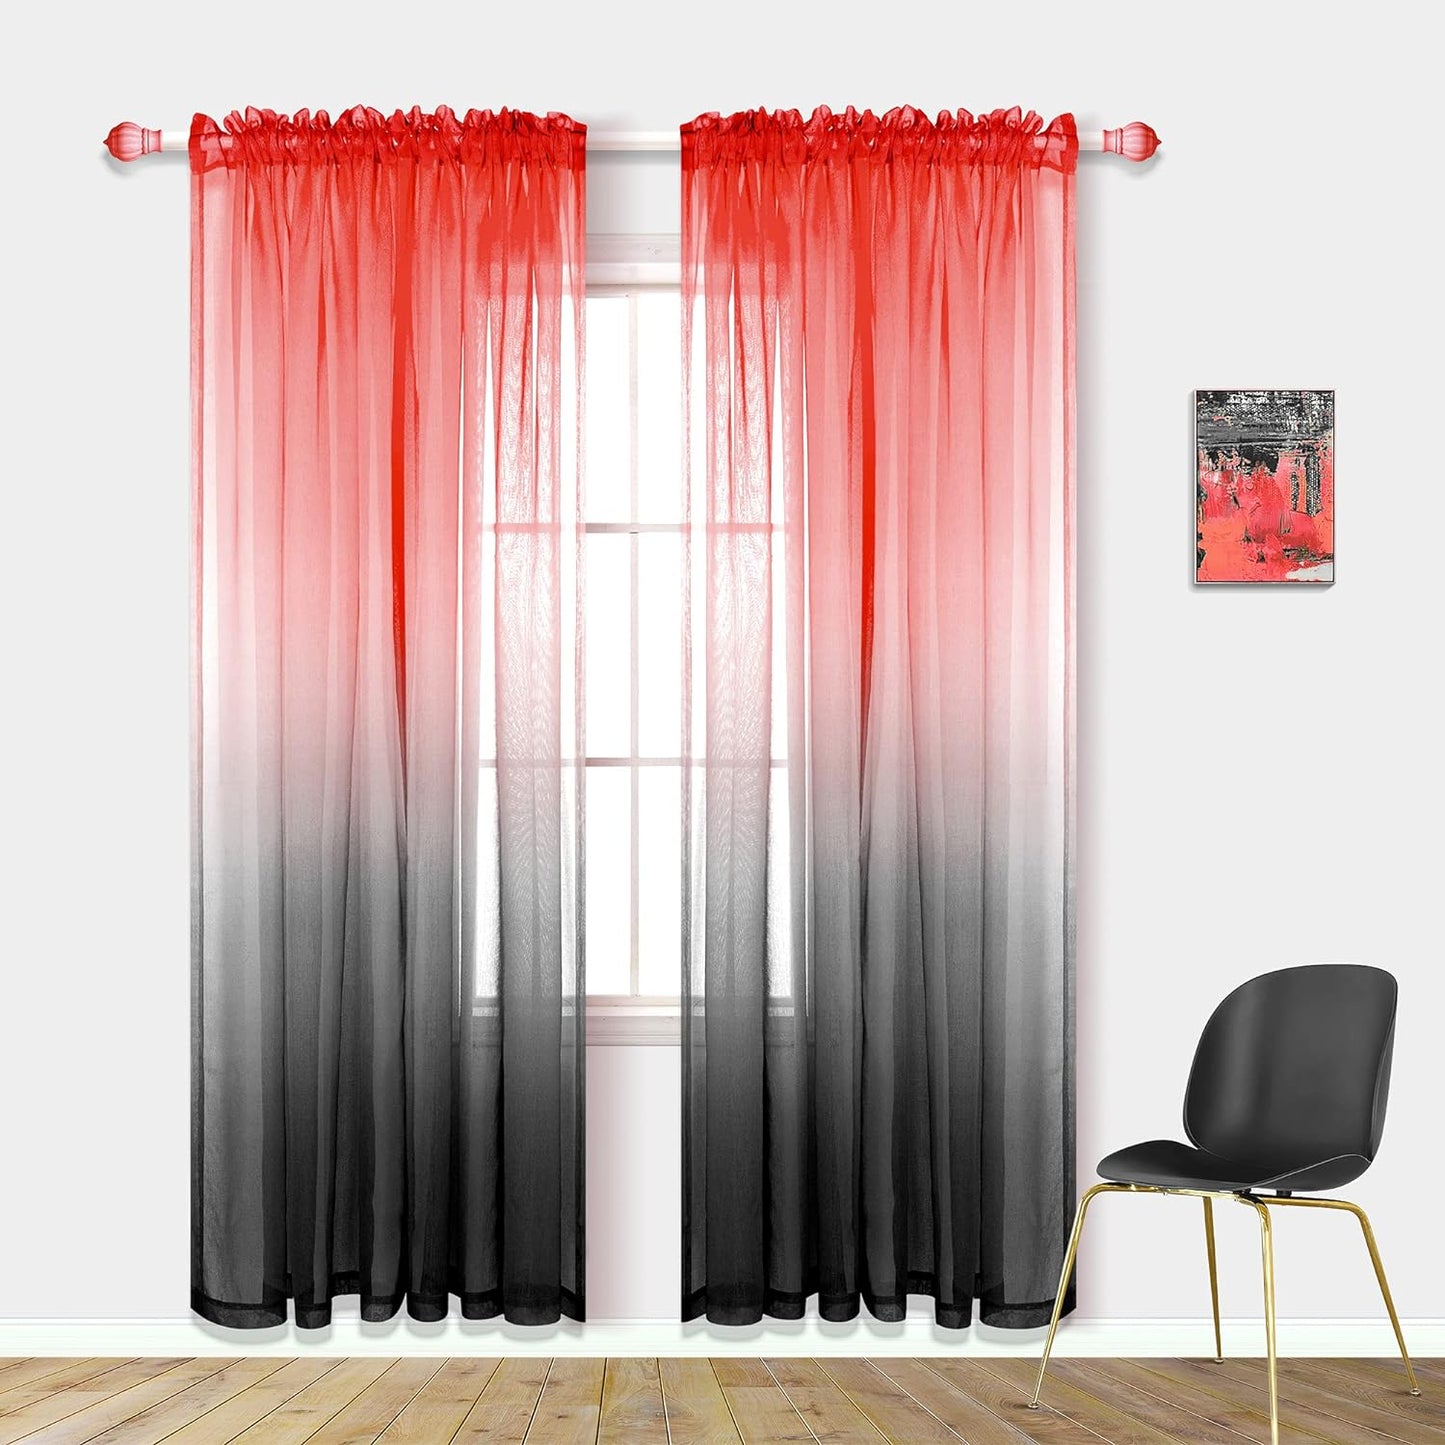 Spring Sheer Curtains for Living Room with Rod Pocket Window Treatments Decor 84 Inch Length Bedroom Curtain Set of 2 Panels Yellow and Grey Gray  PITALK TEXTILE Red And Black 52X84 